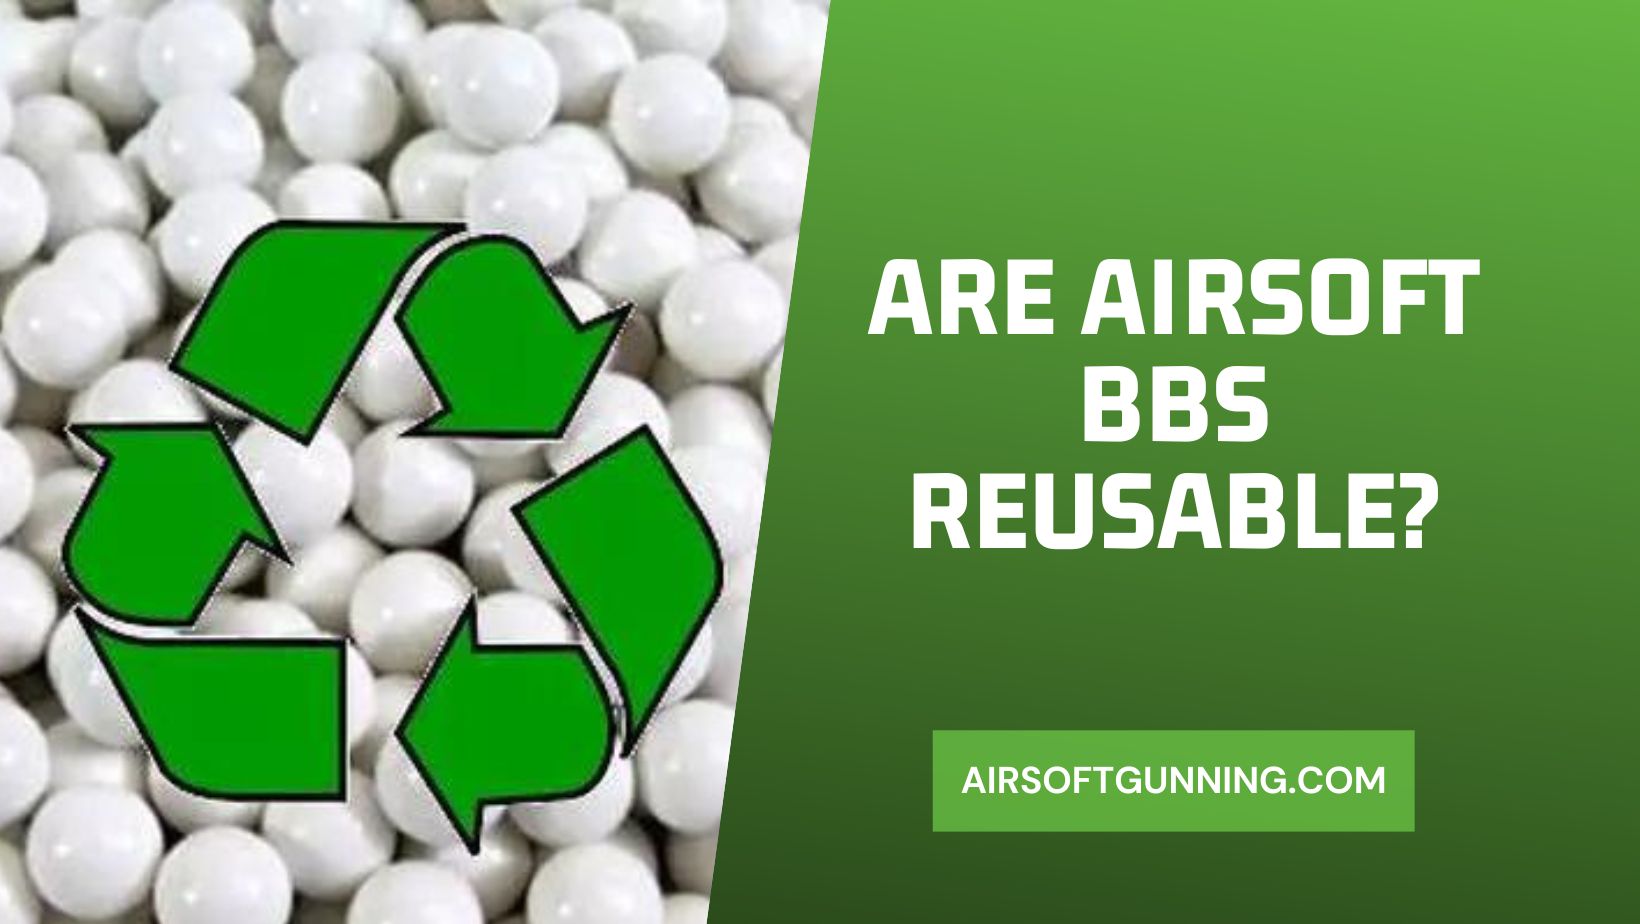 Are Airsoft BBs Reuseable